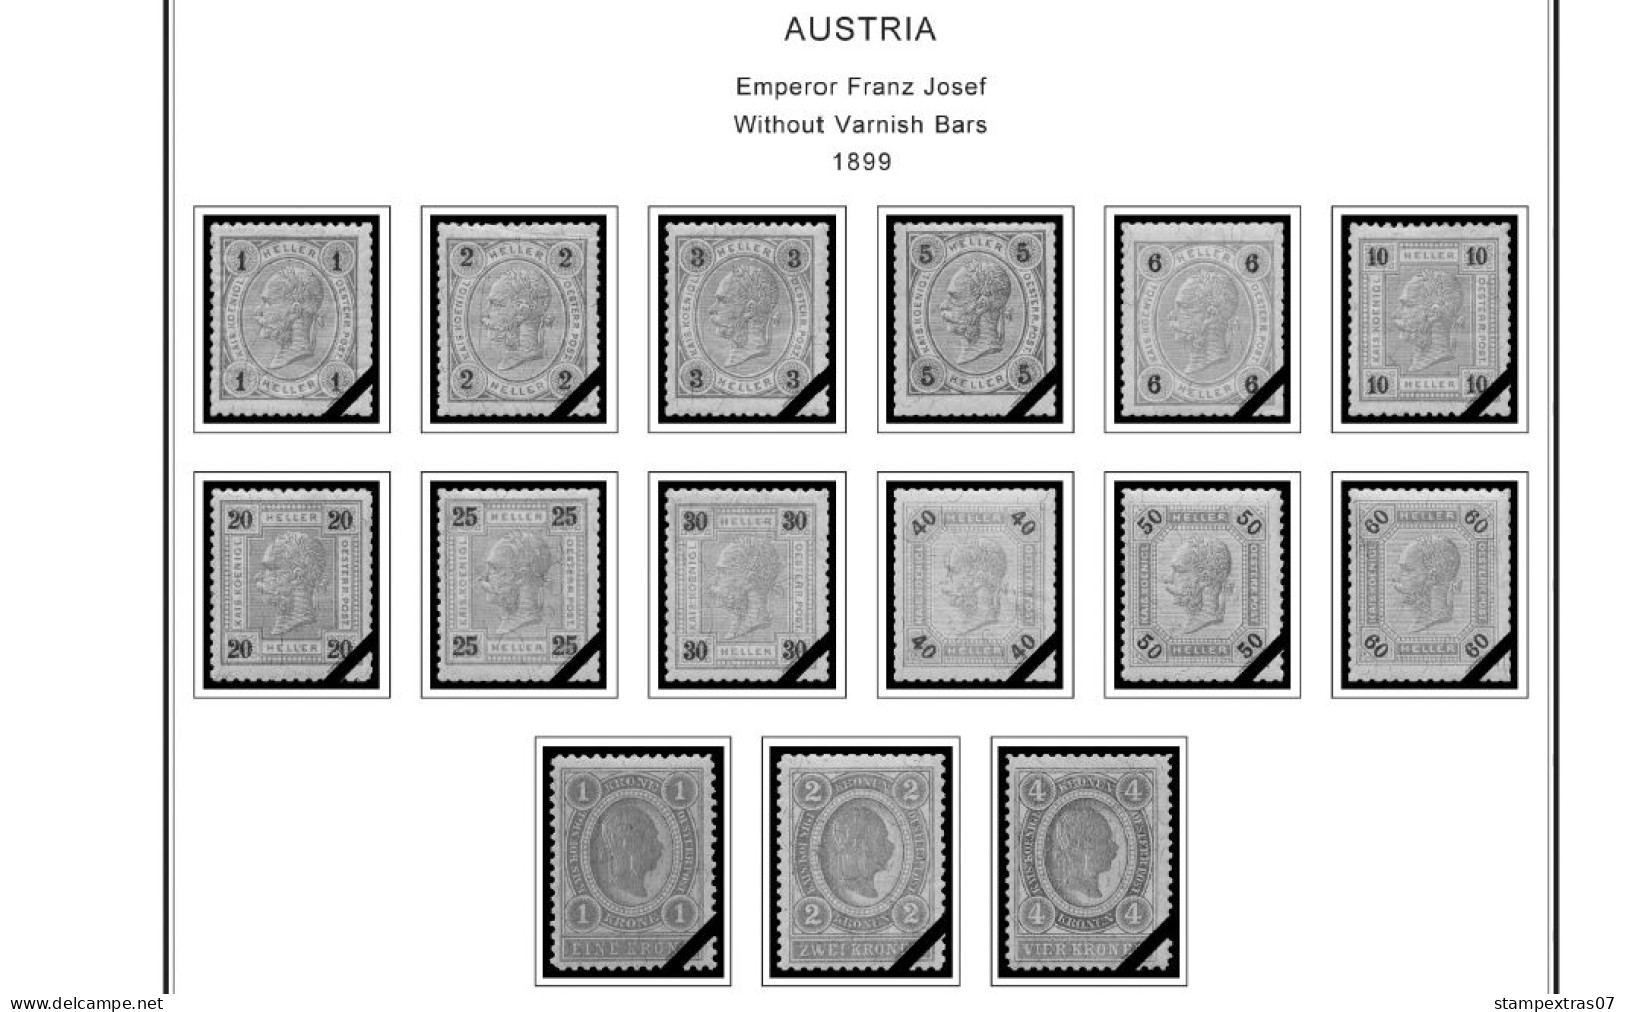 AUSTRIA 1850-2010 + 2011-2020 STAMP ALBUM PAGES (417 B&w Illustrated Pages) - Engels